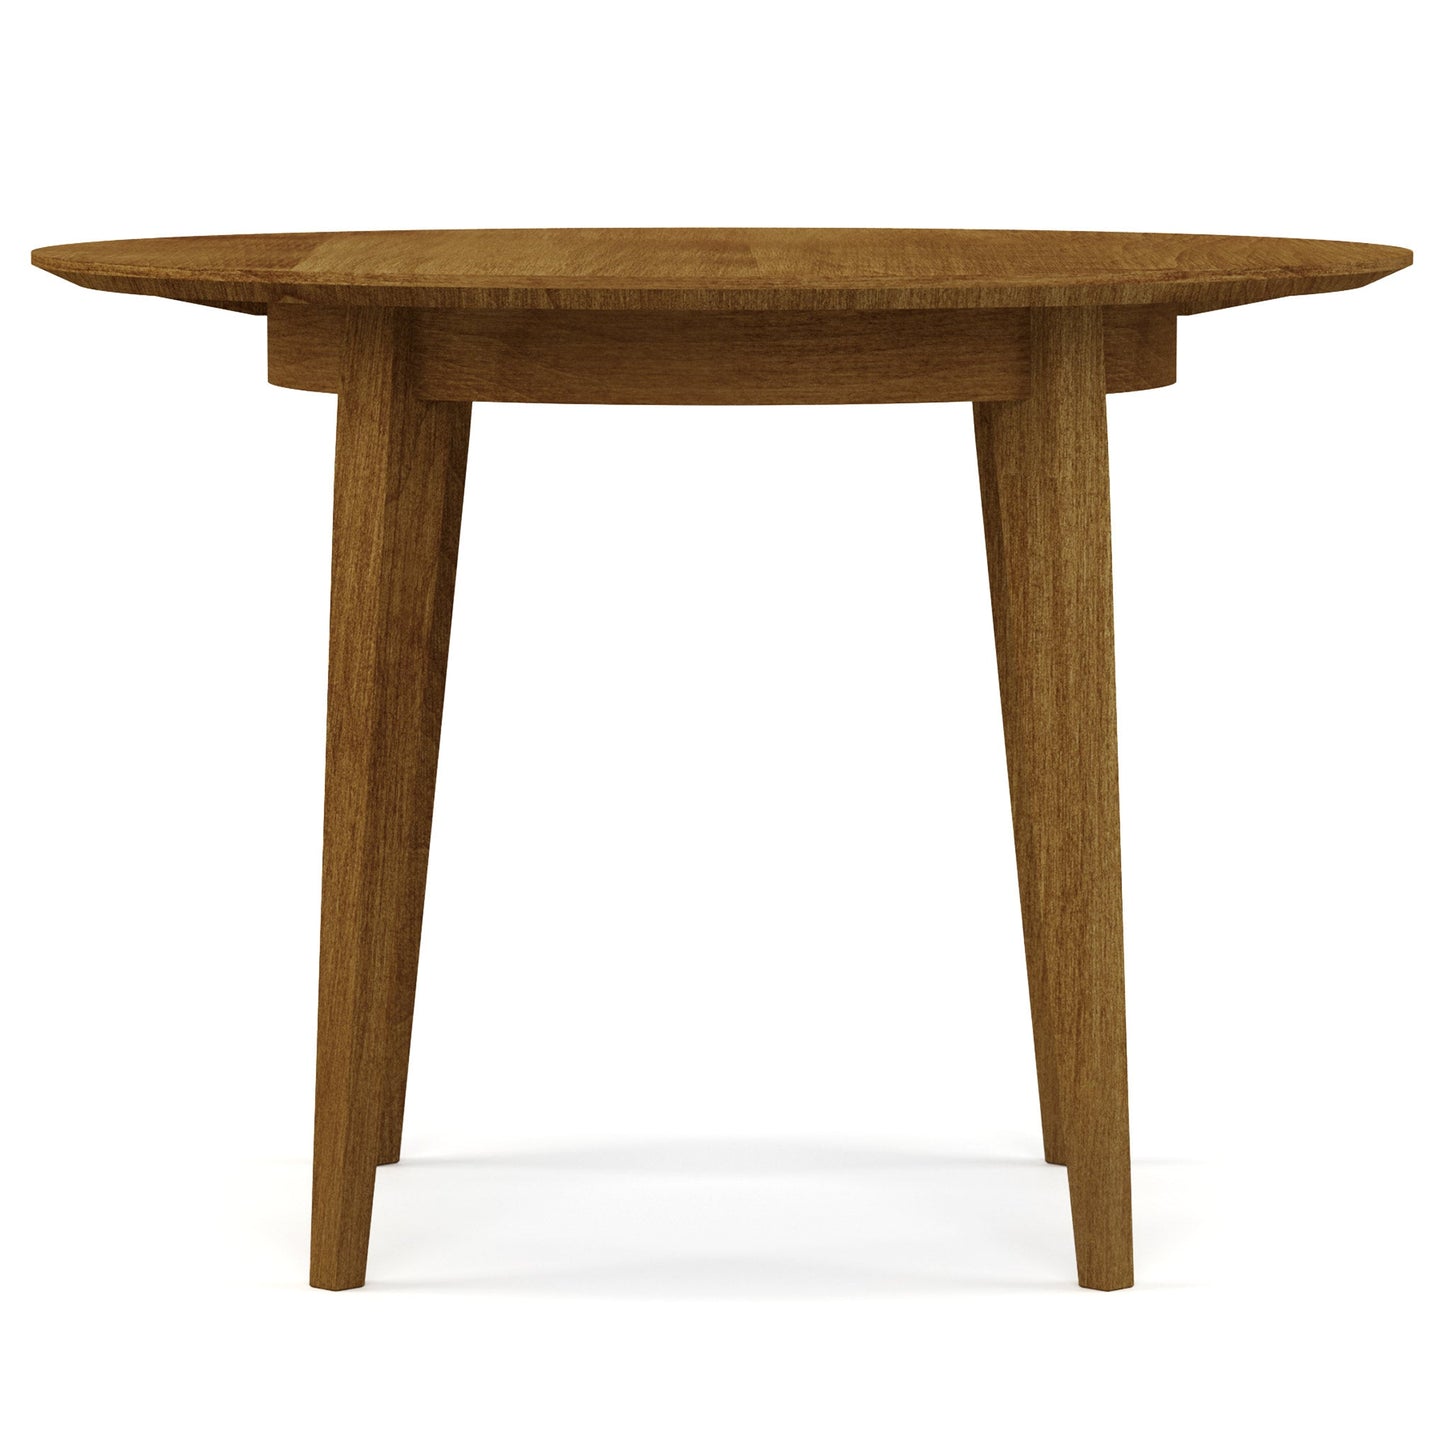 Gable Road 42-inch Round Dining Table